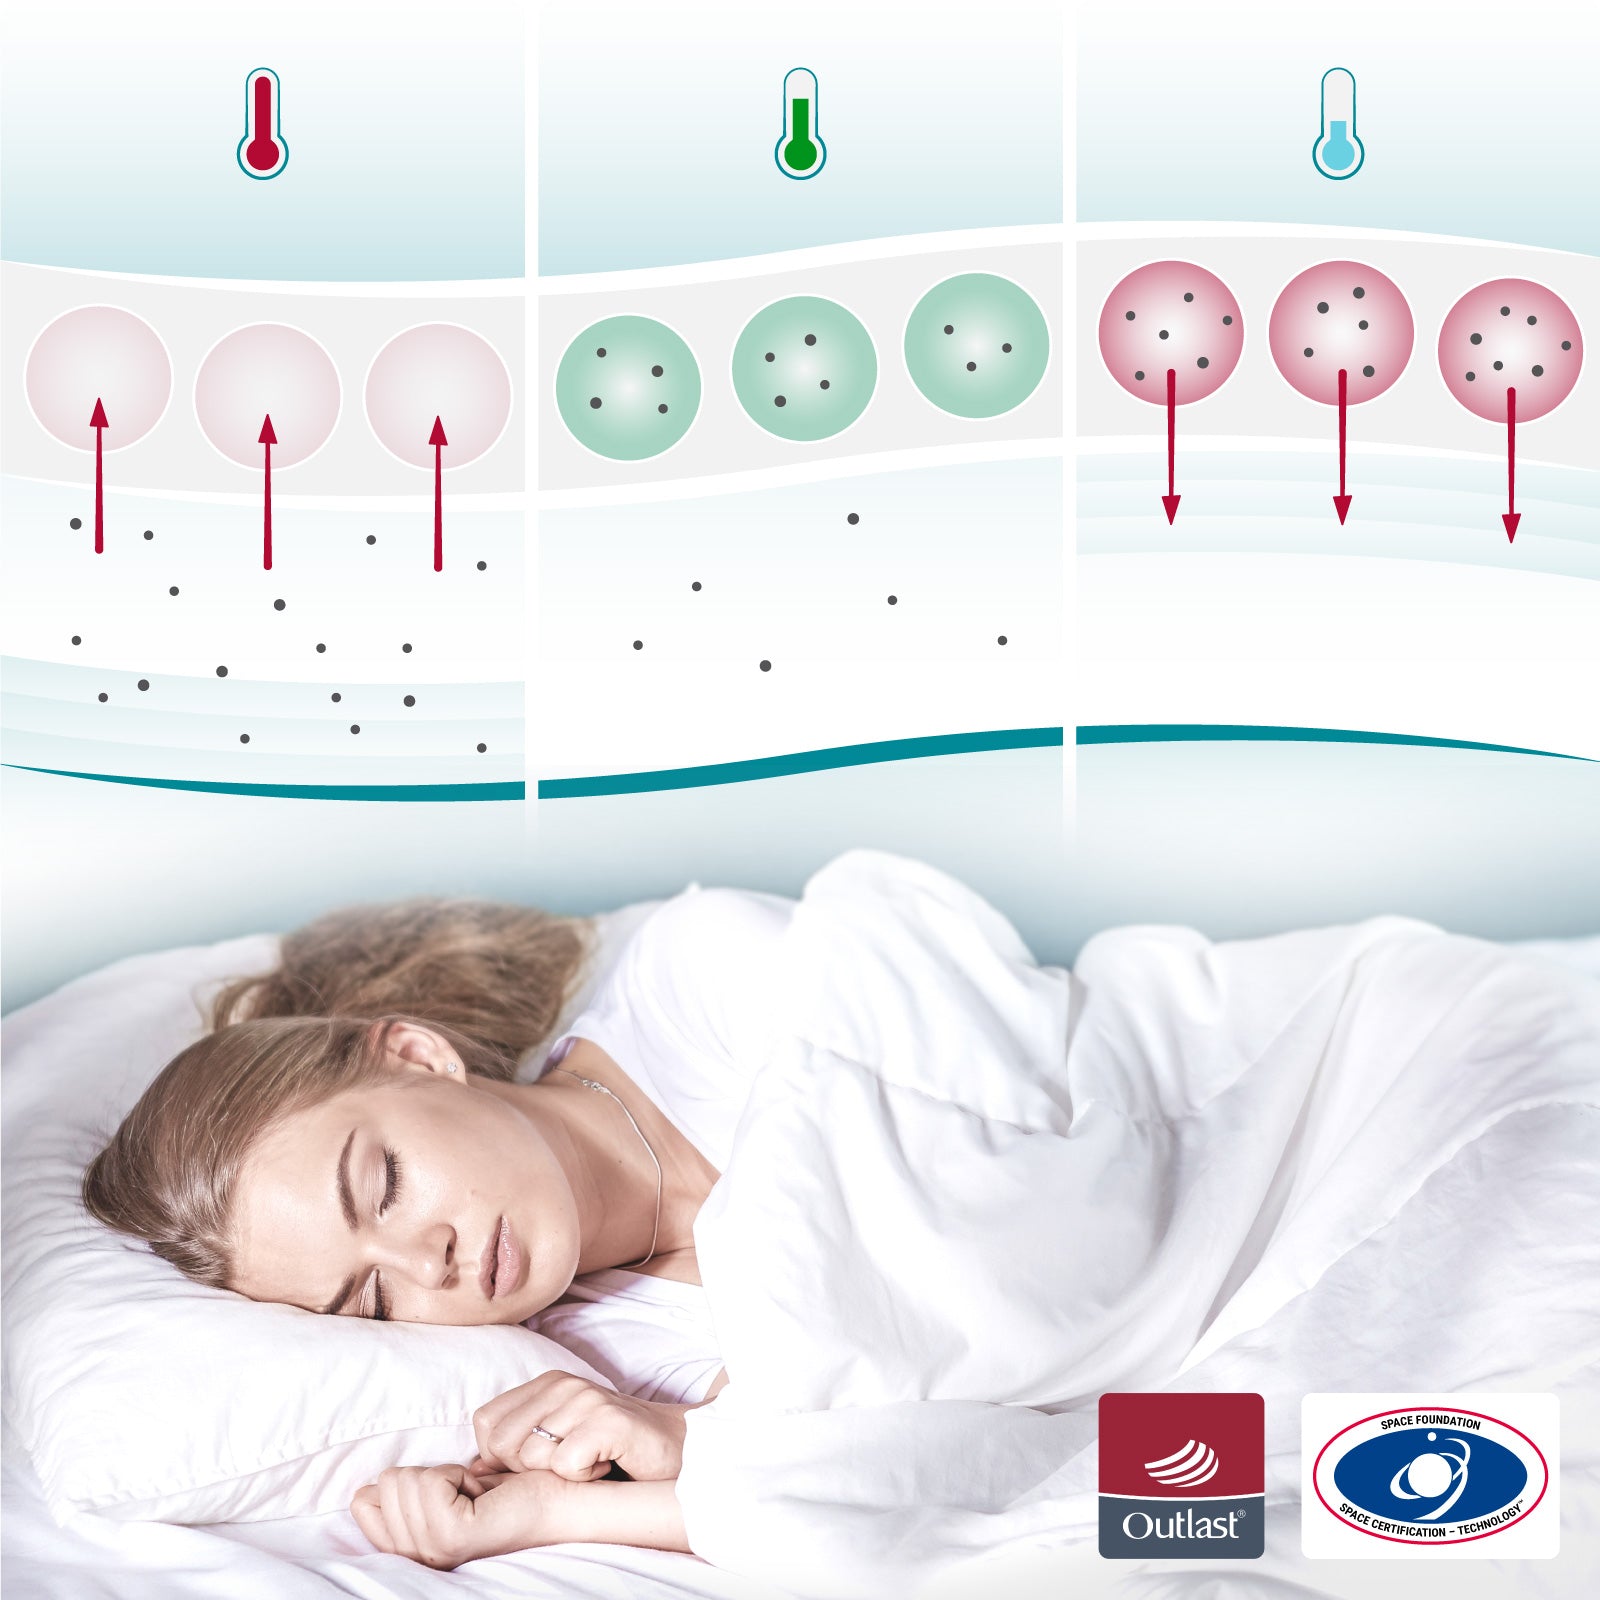 Mattress pad with cooling effect - Cool.Moments